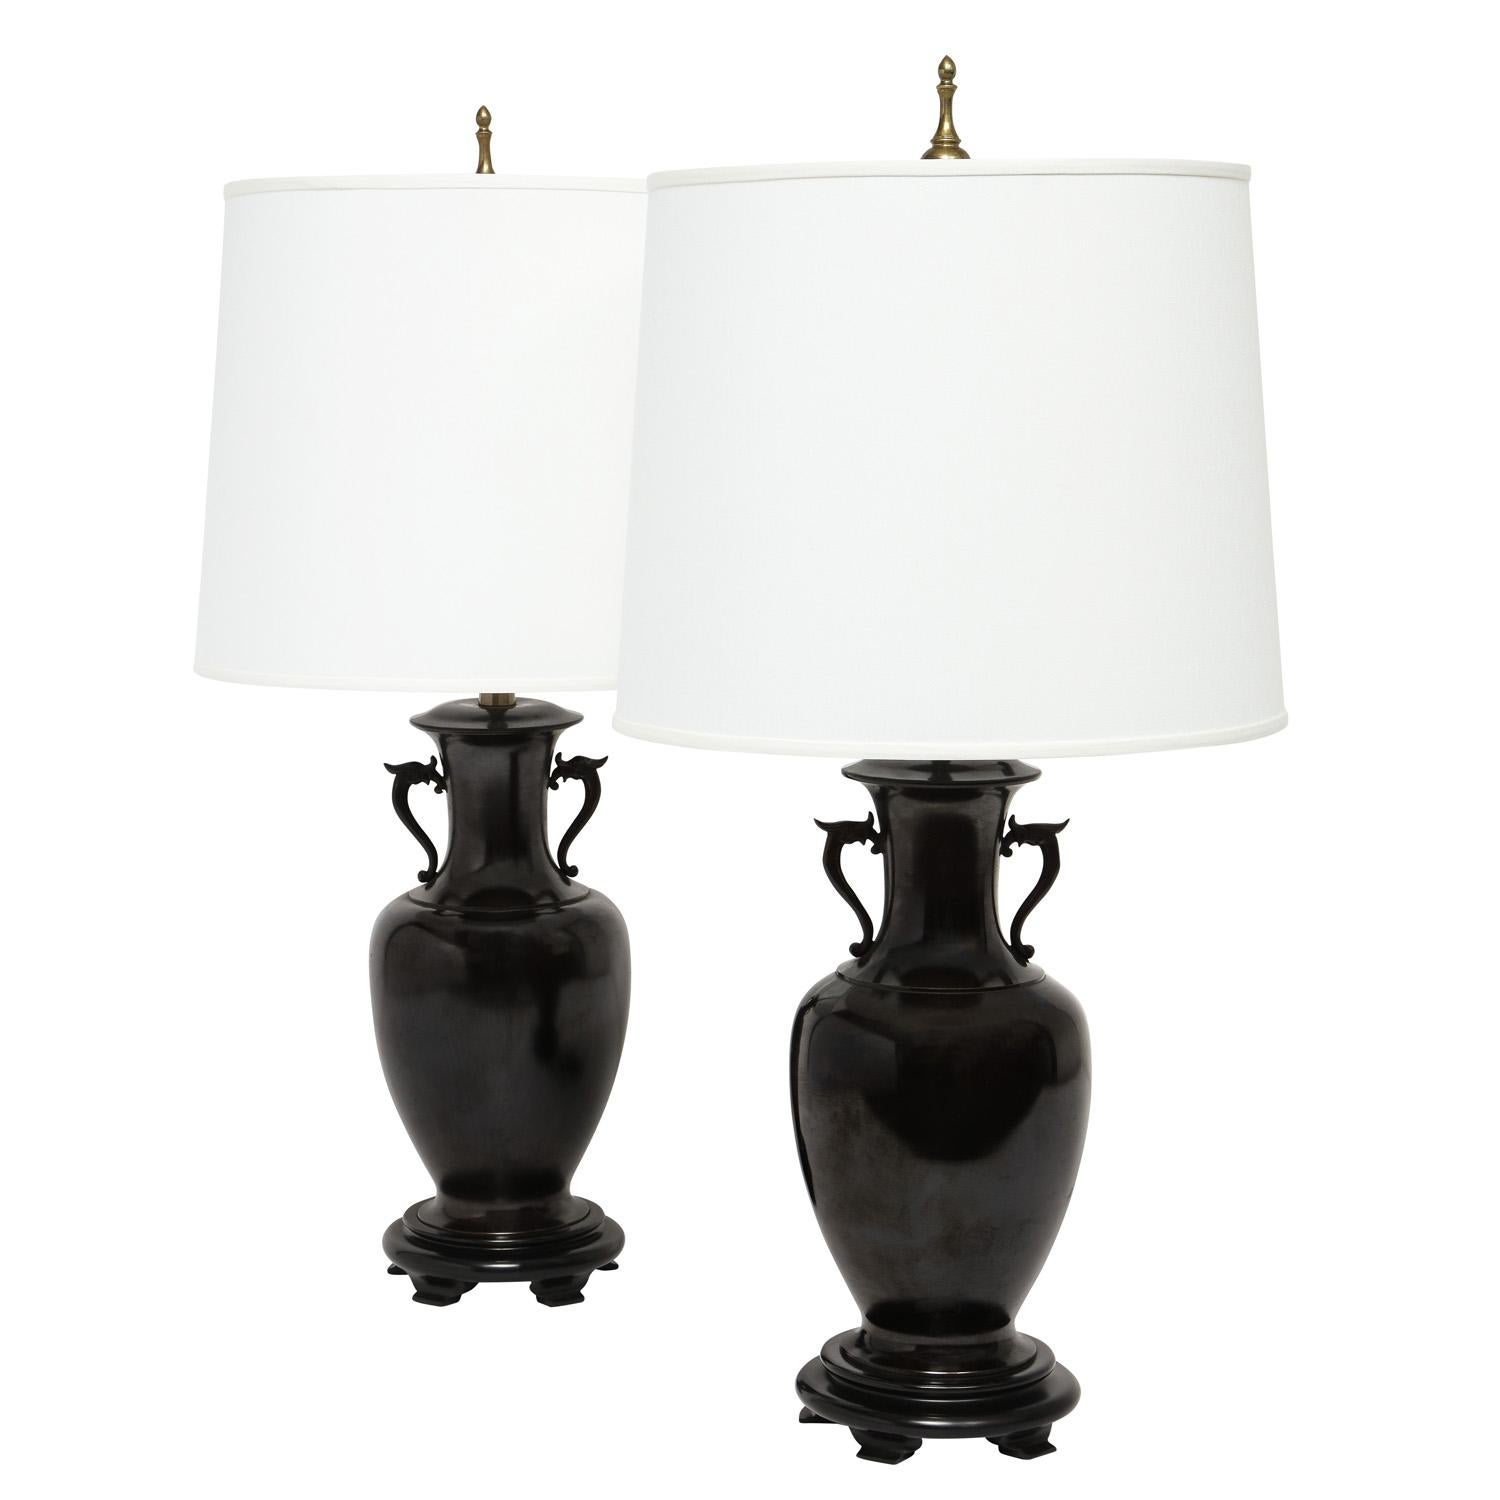 Pair of artisan Asian-style table lamps in gunmetal bronze with dragons on sides and brass hardware on ebonized wood bases, American 1960's. These lamps are beautifully proportioned and very chic.

Shade Diameter: 16 inches
Shade Height: 13